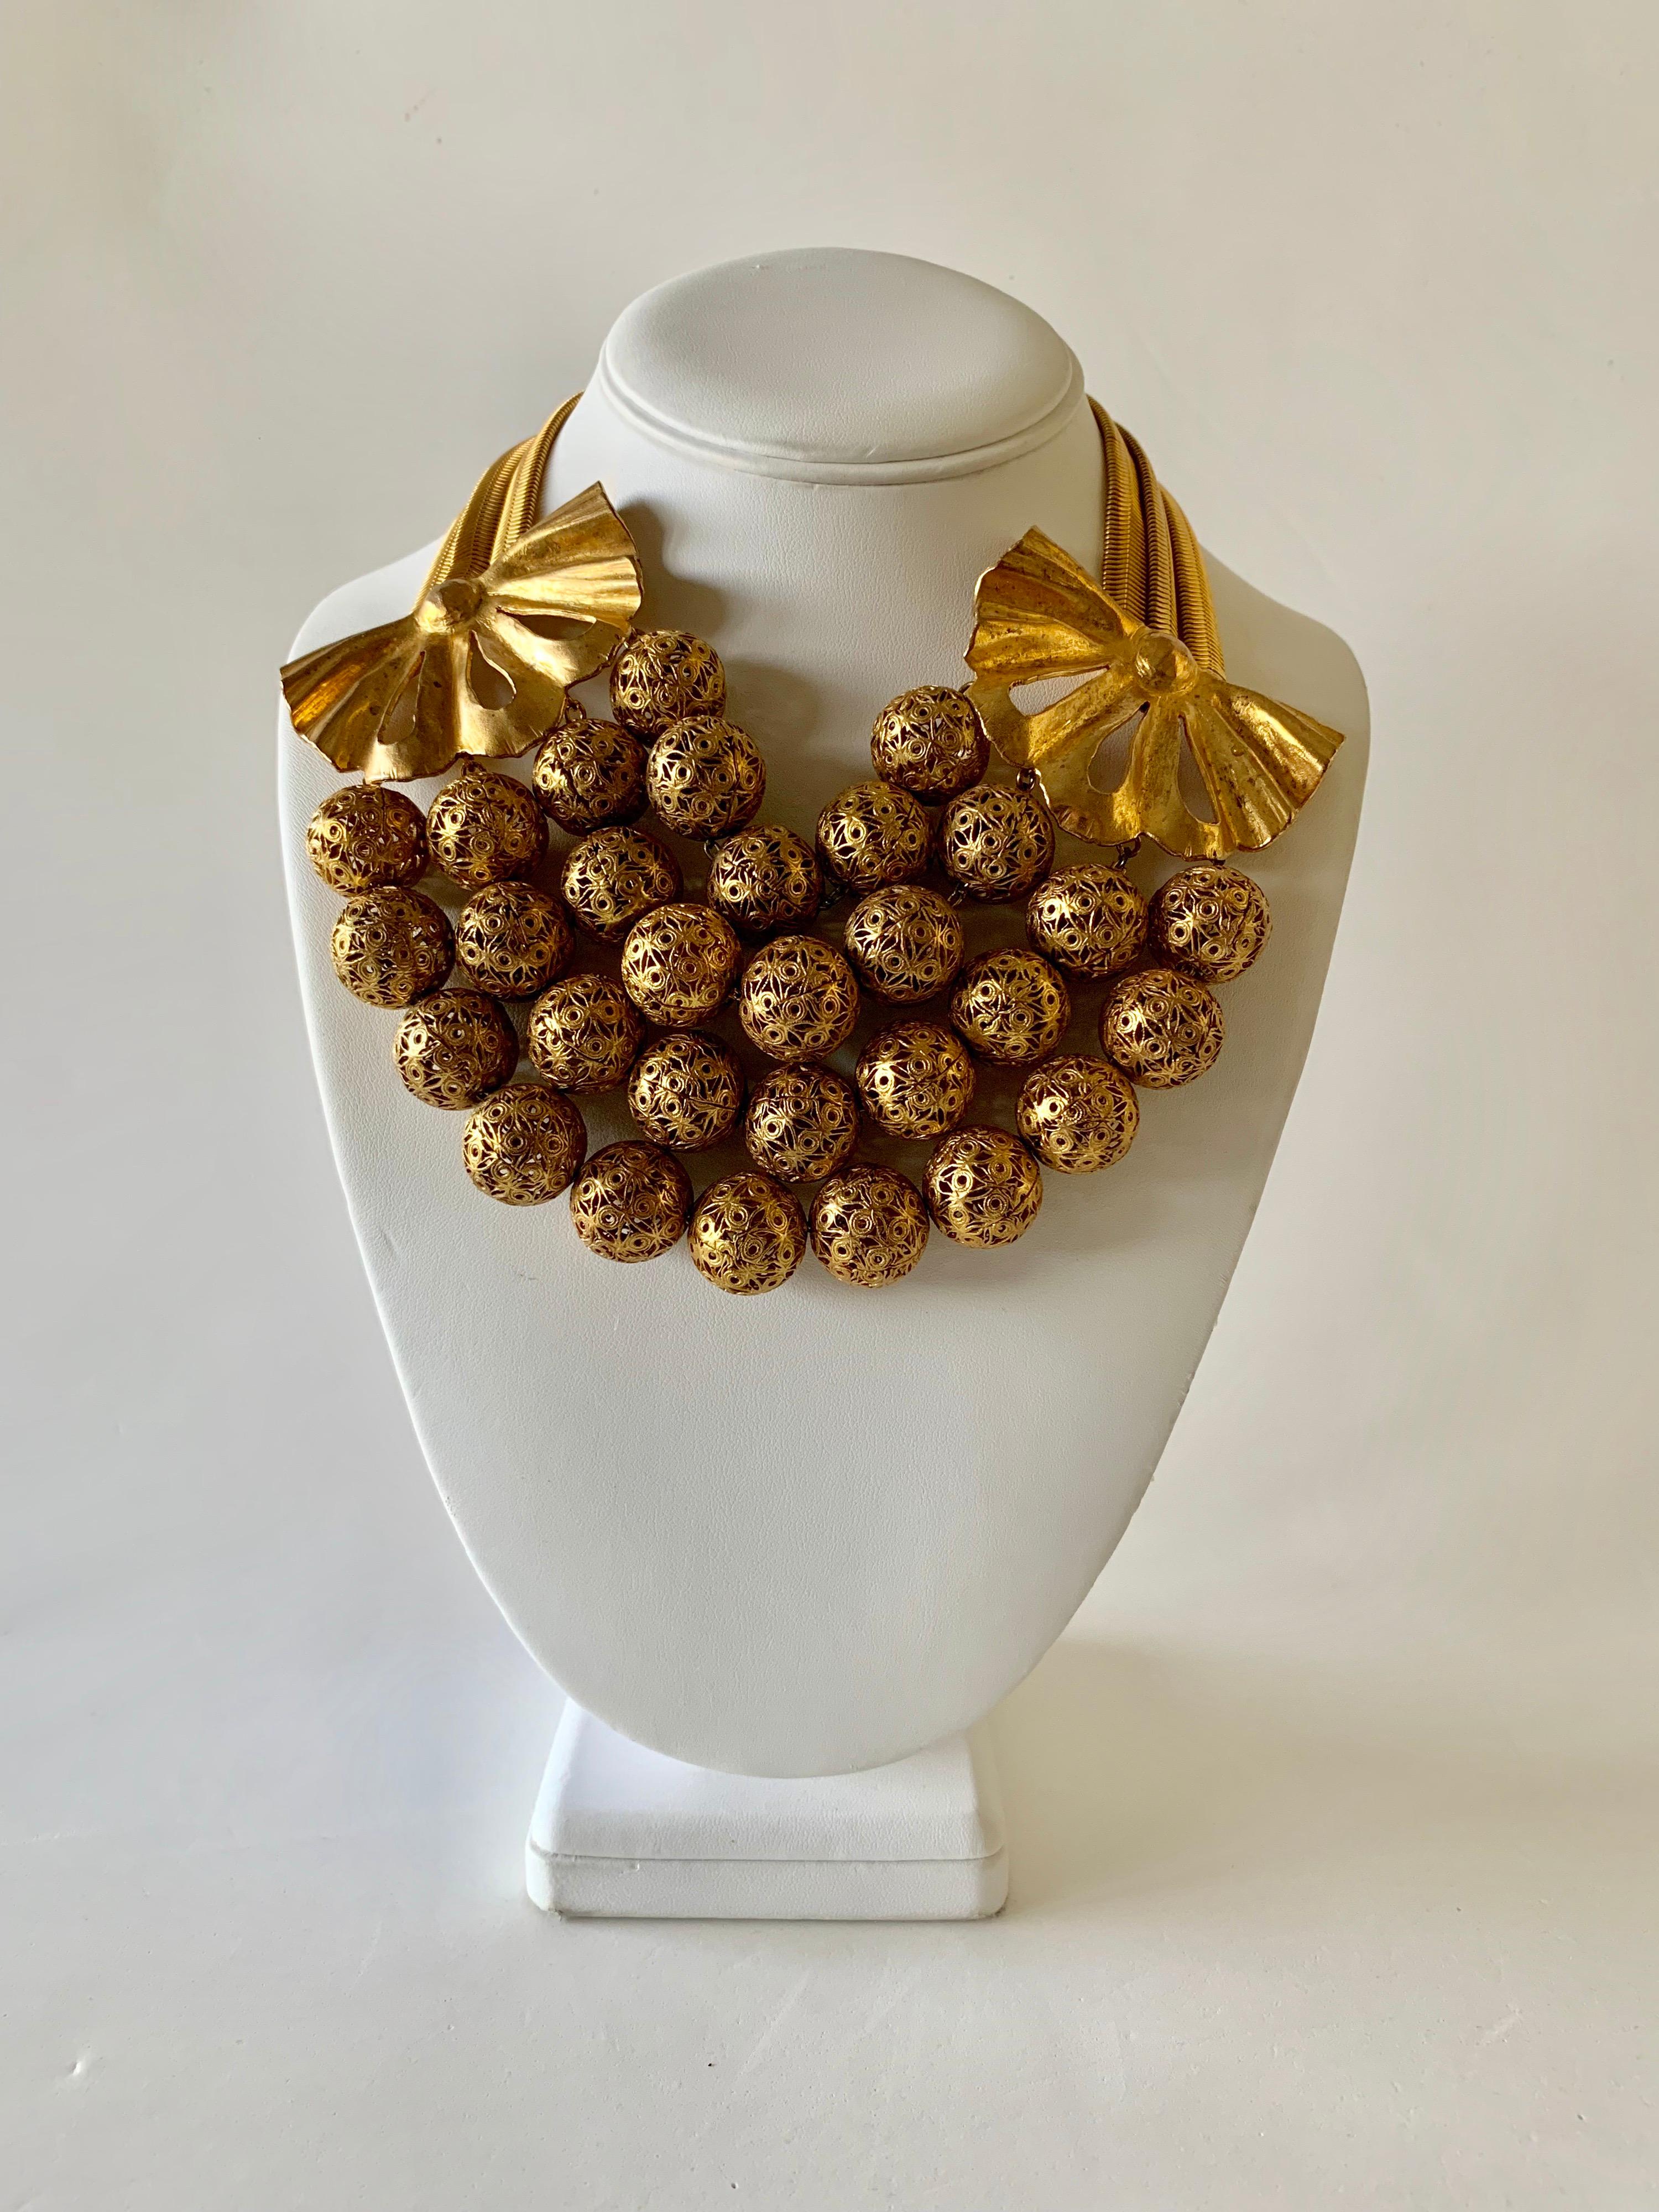 Scarce vintage gilt, Rochas Paris statement necklace circa the 1940s-1950s. This special necklace was designed by Max Boinet and executed by Mr. Robert Goossens for Rochas, comprised out of gilt metal the statement necklace features romantic yet